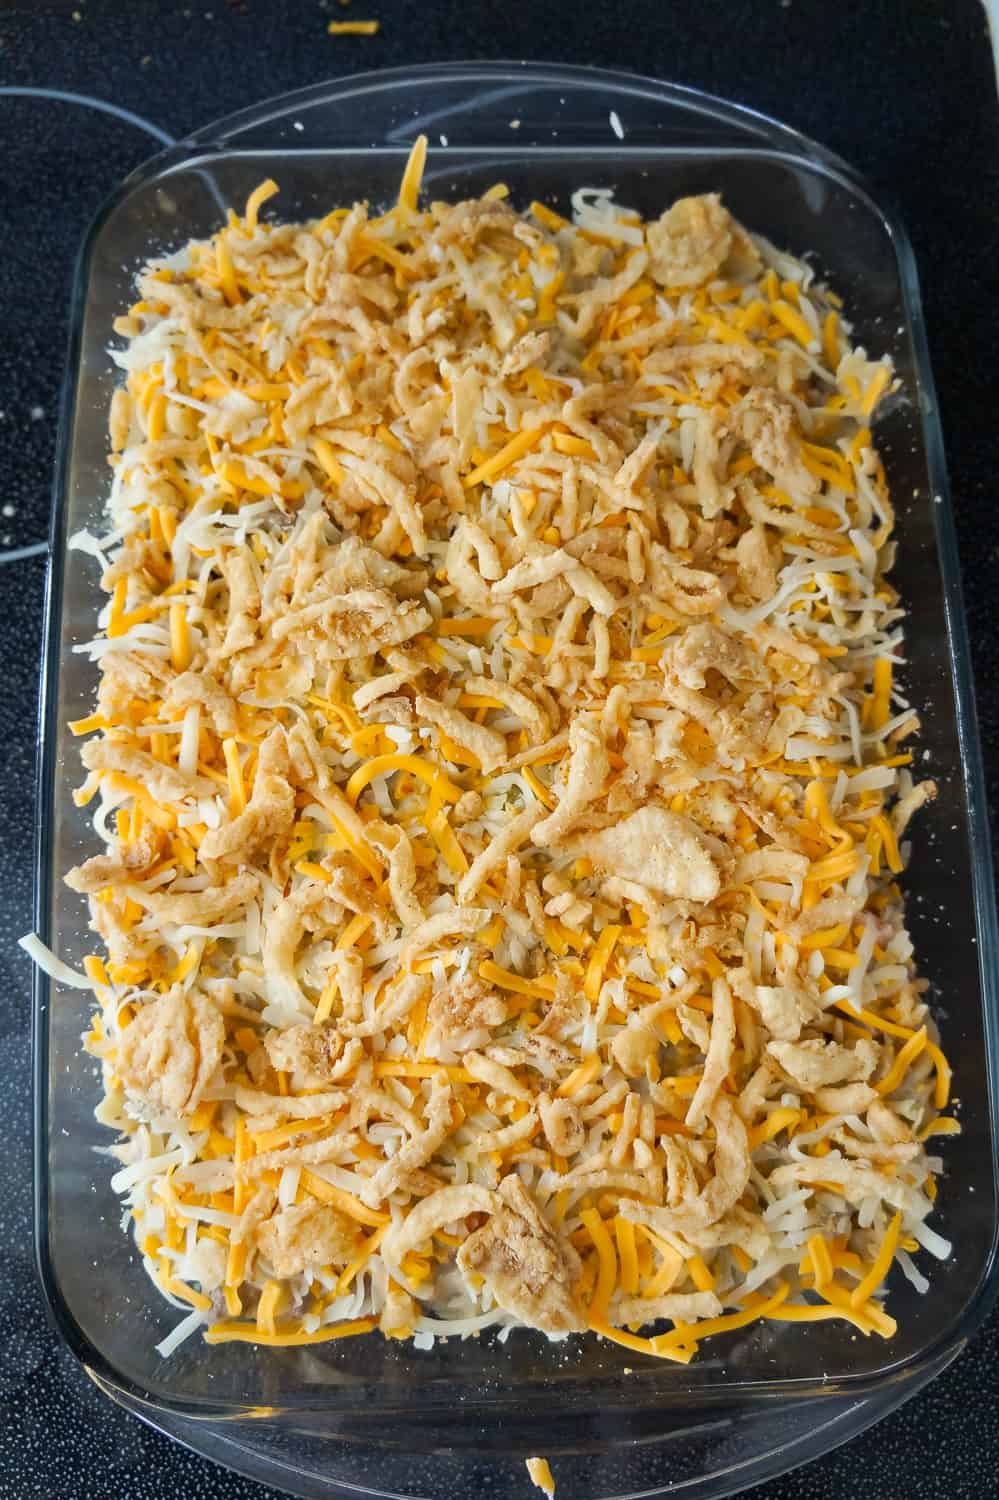 French's fried onions and shredded cheese on top of hamburger noodle casserole before baking